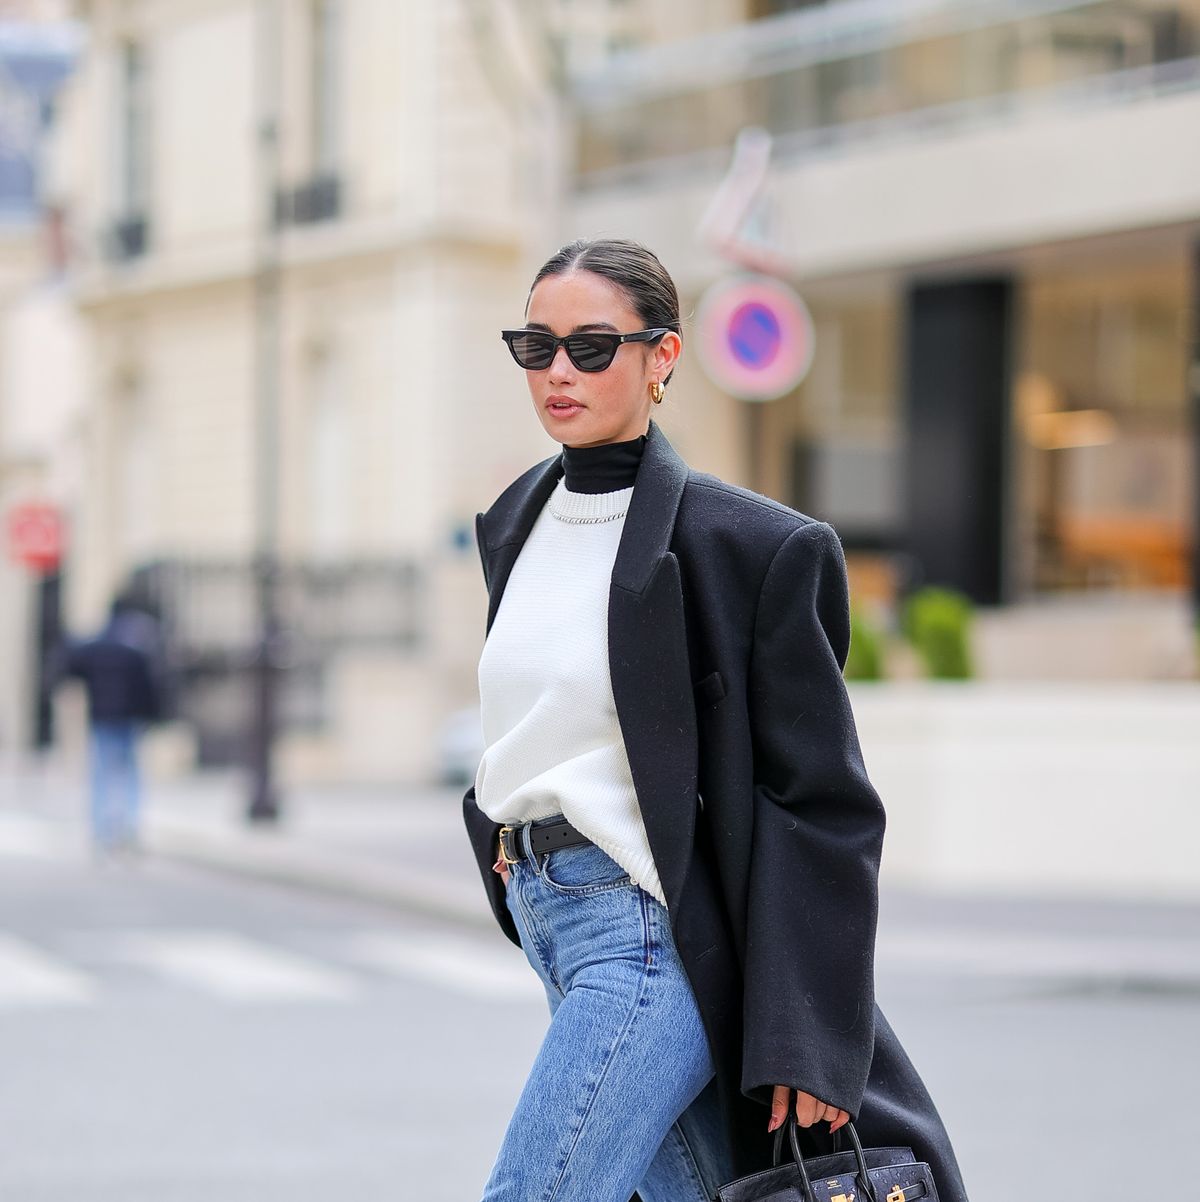 Best denim brands loved by fashion editors and influencers